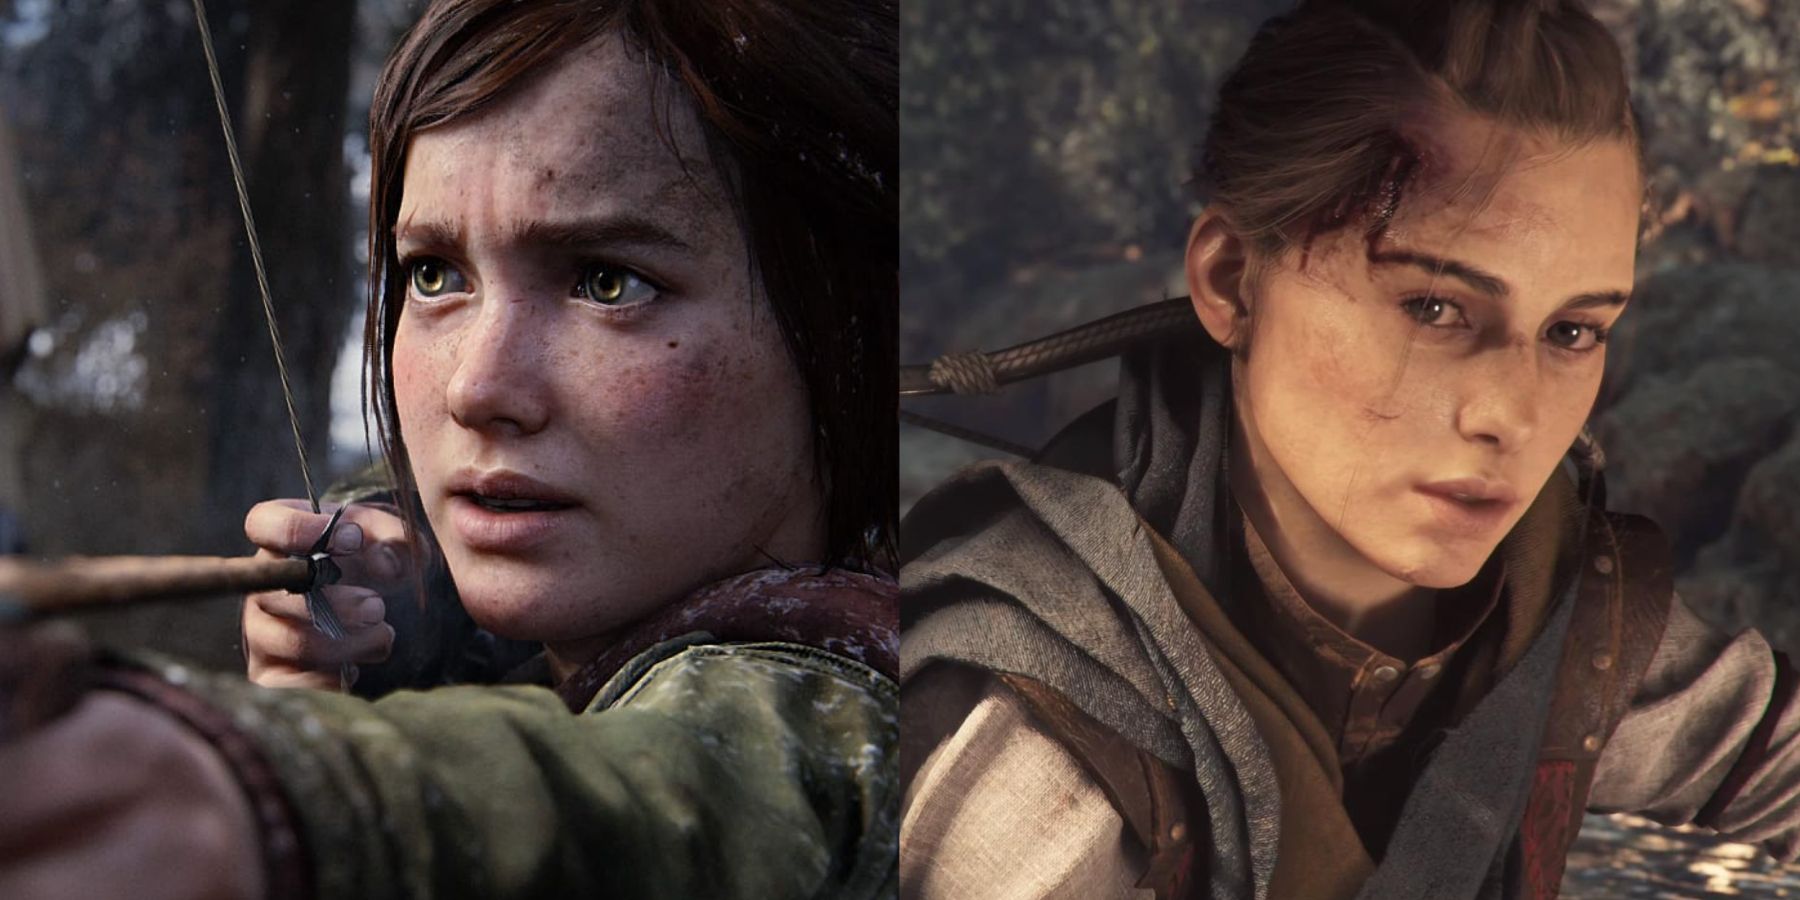 Where to buy 'The Last of Us' video games